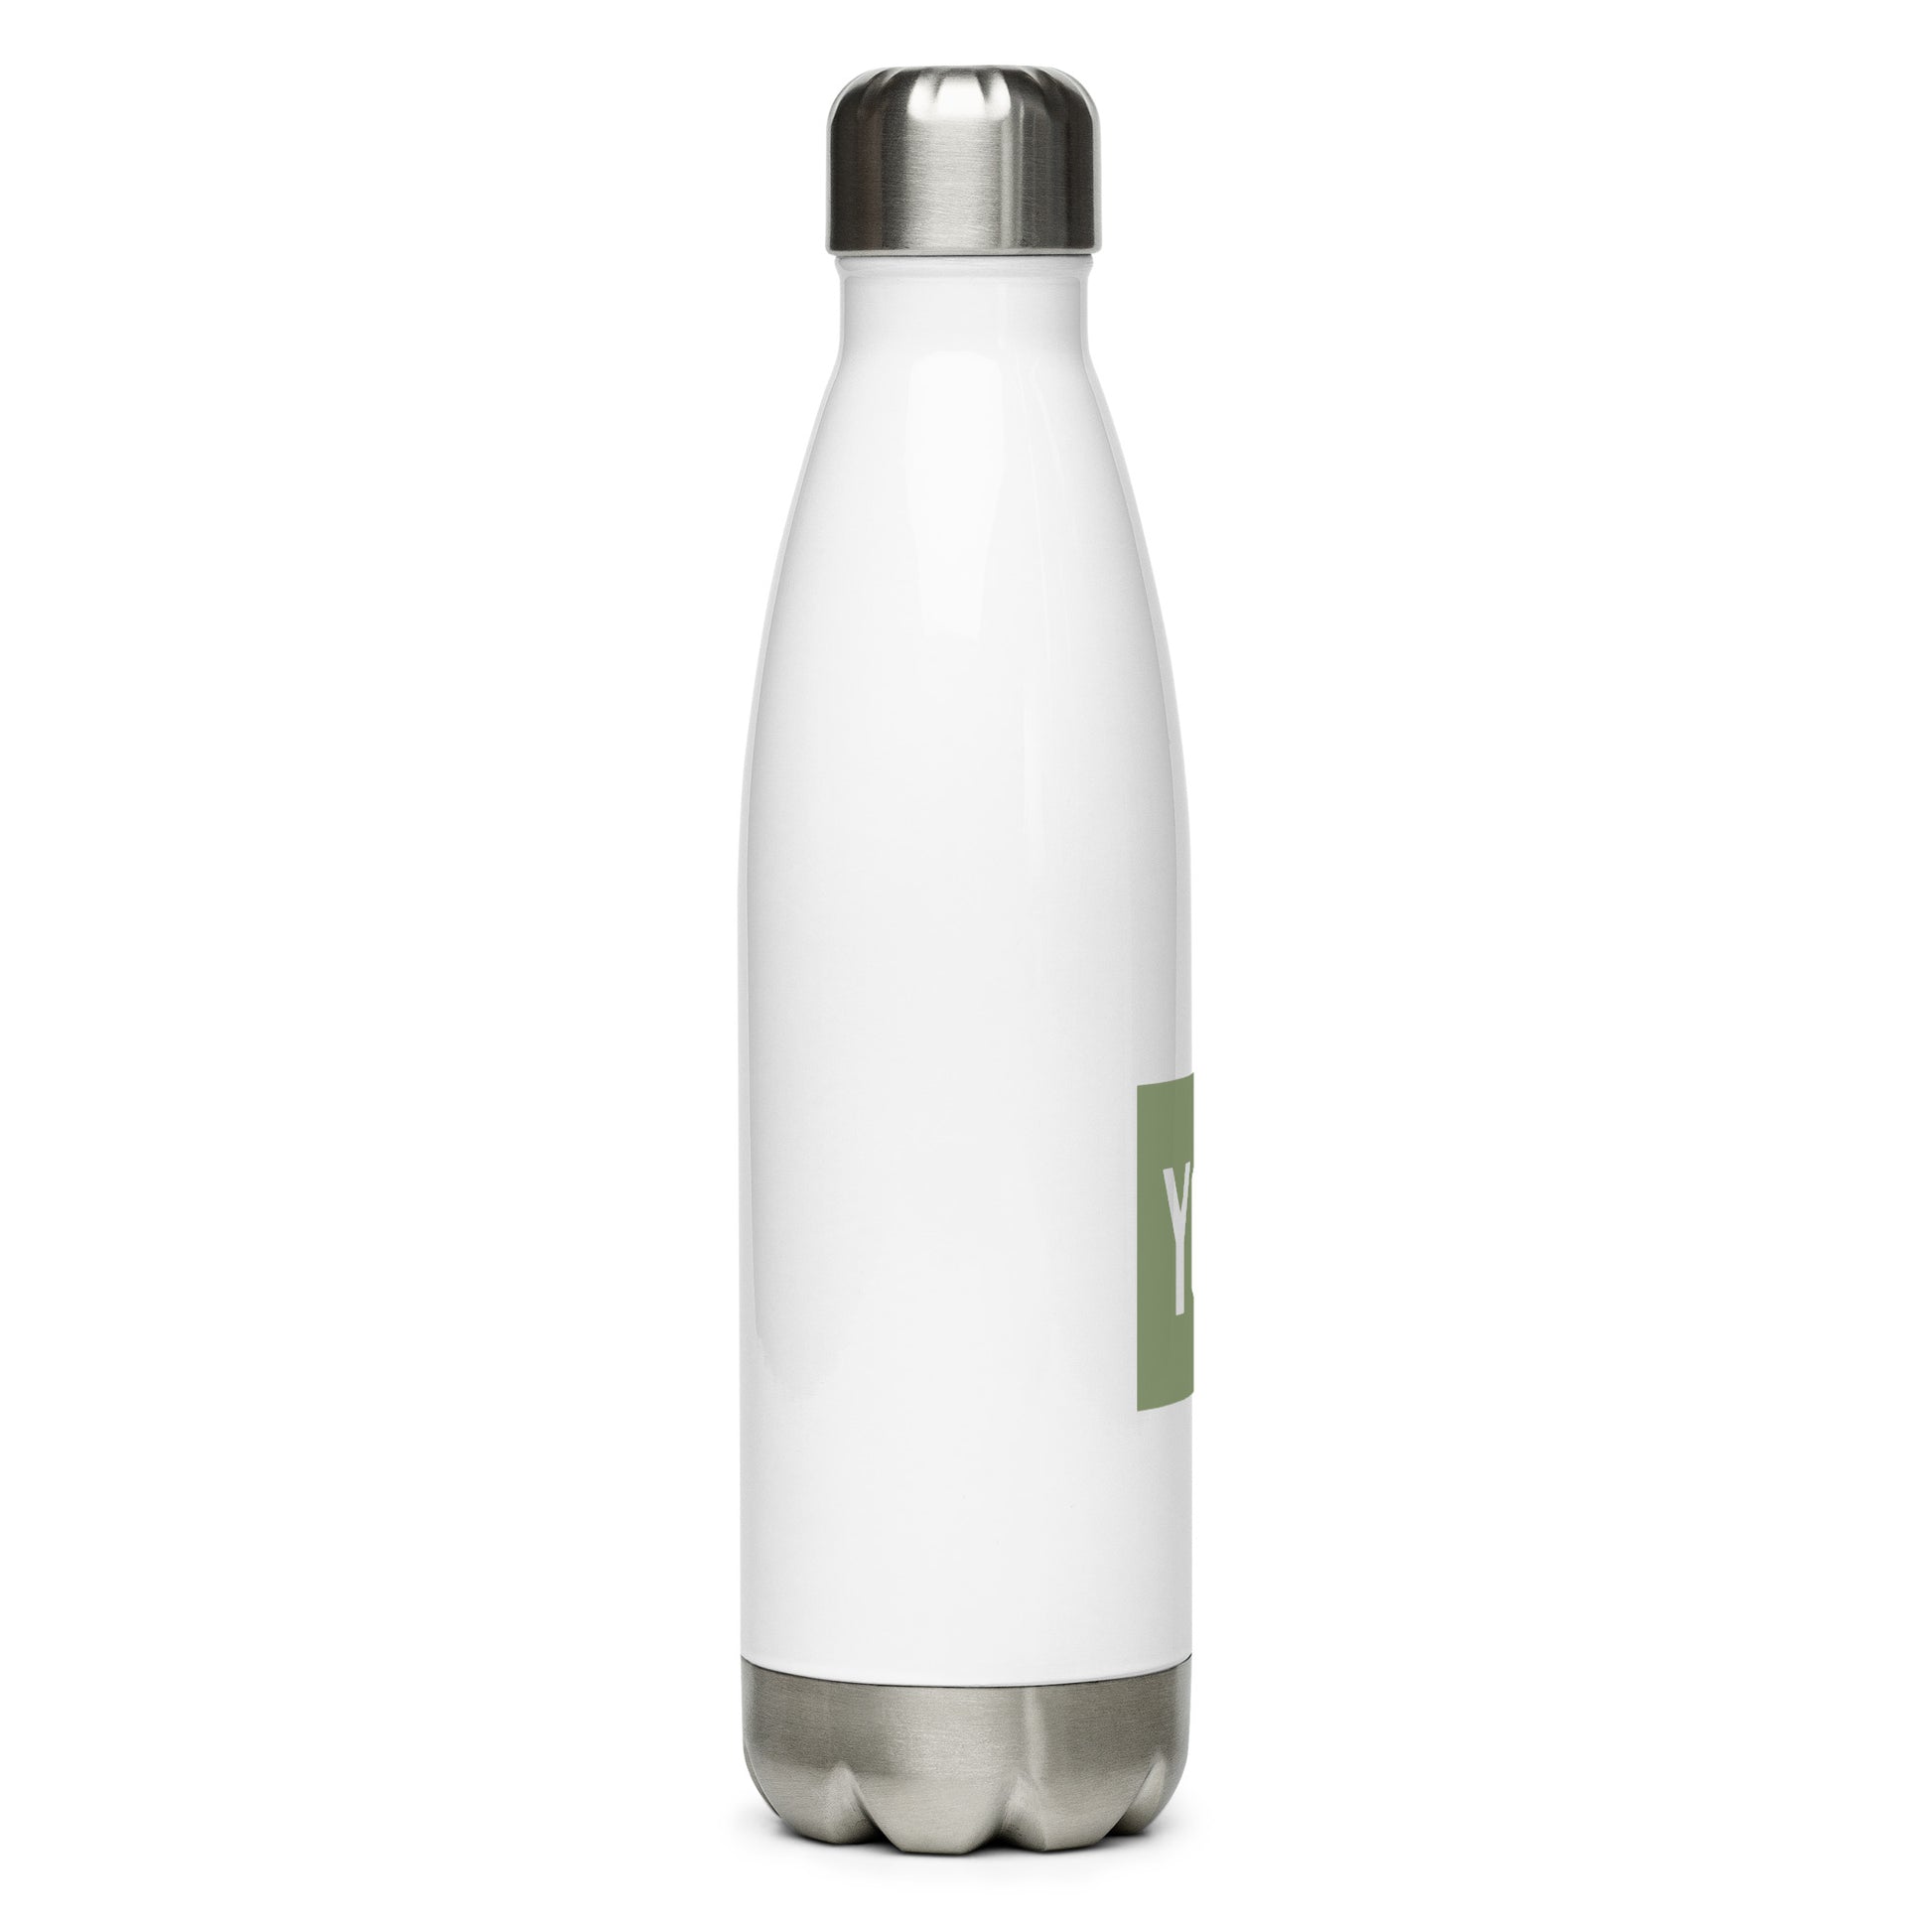 Aviation Gift Water Bottle - Camo Green • YQM Moncton • YHM Designs - Image 07